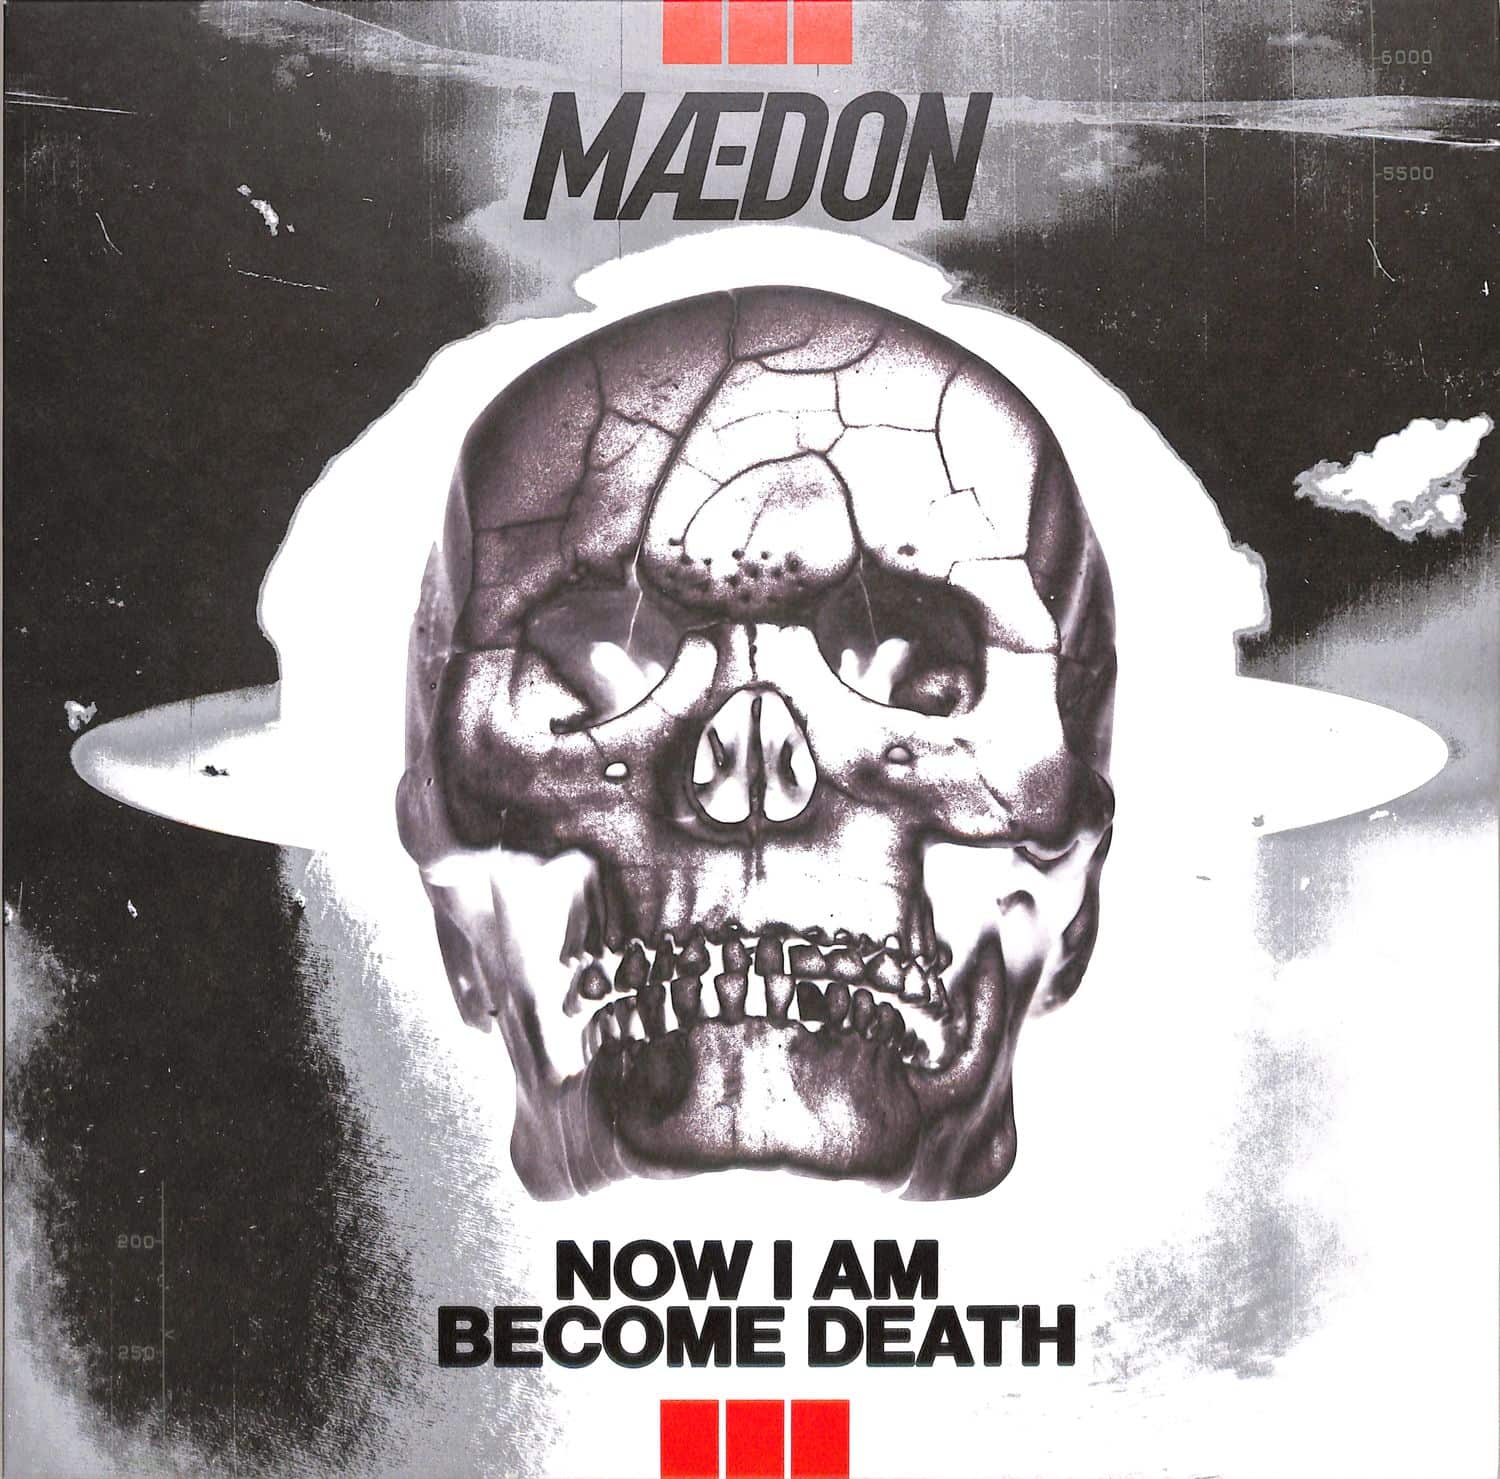 Maedeon - NOW I AM BECOME DEATH 